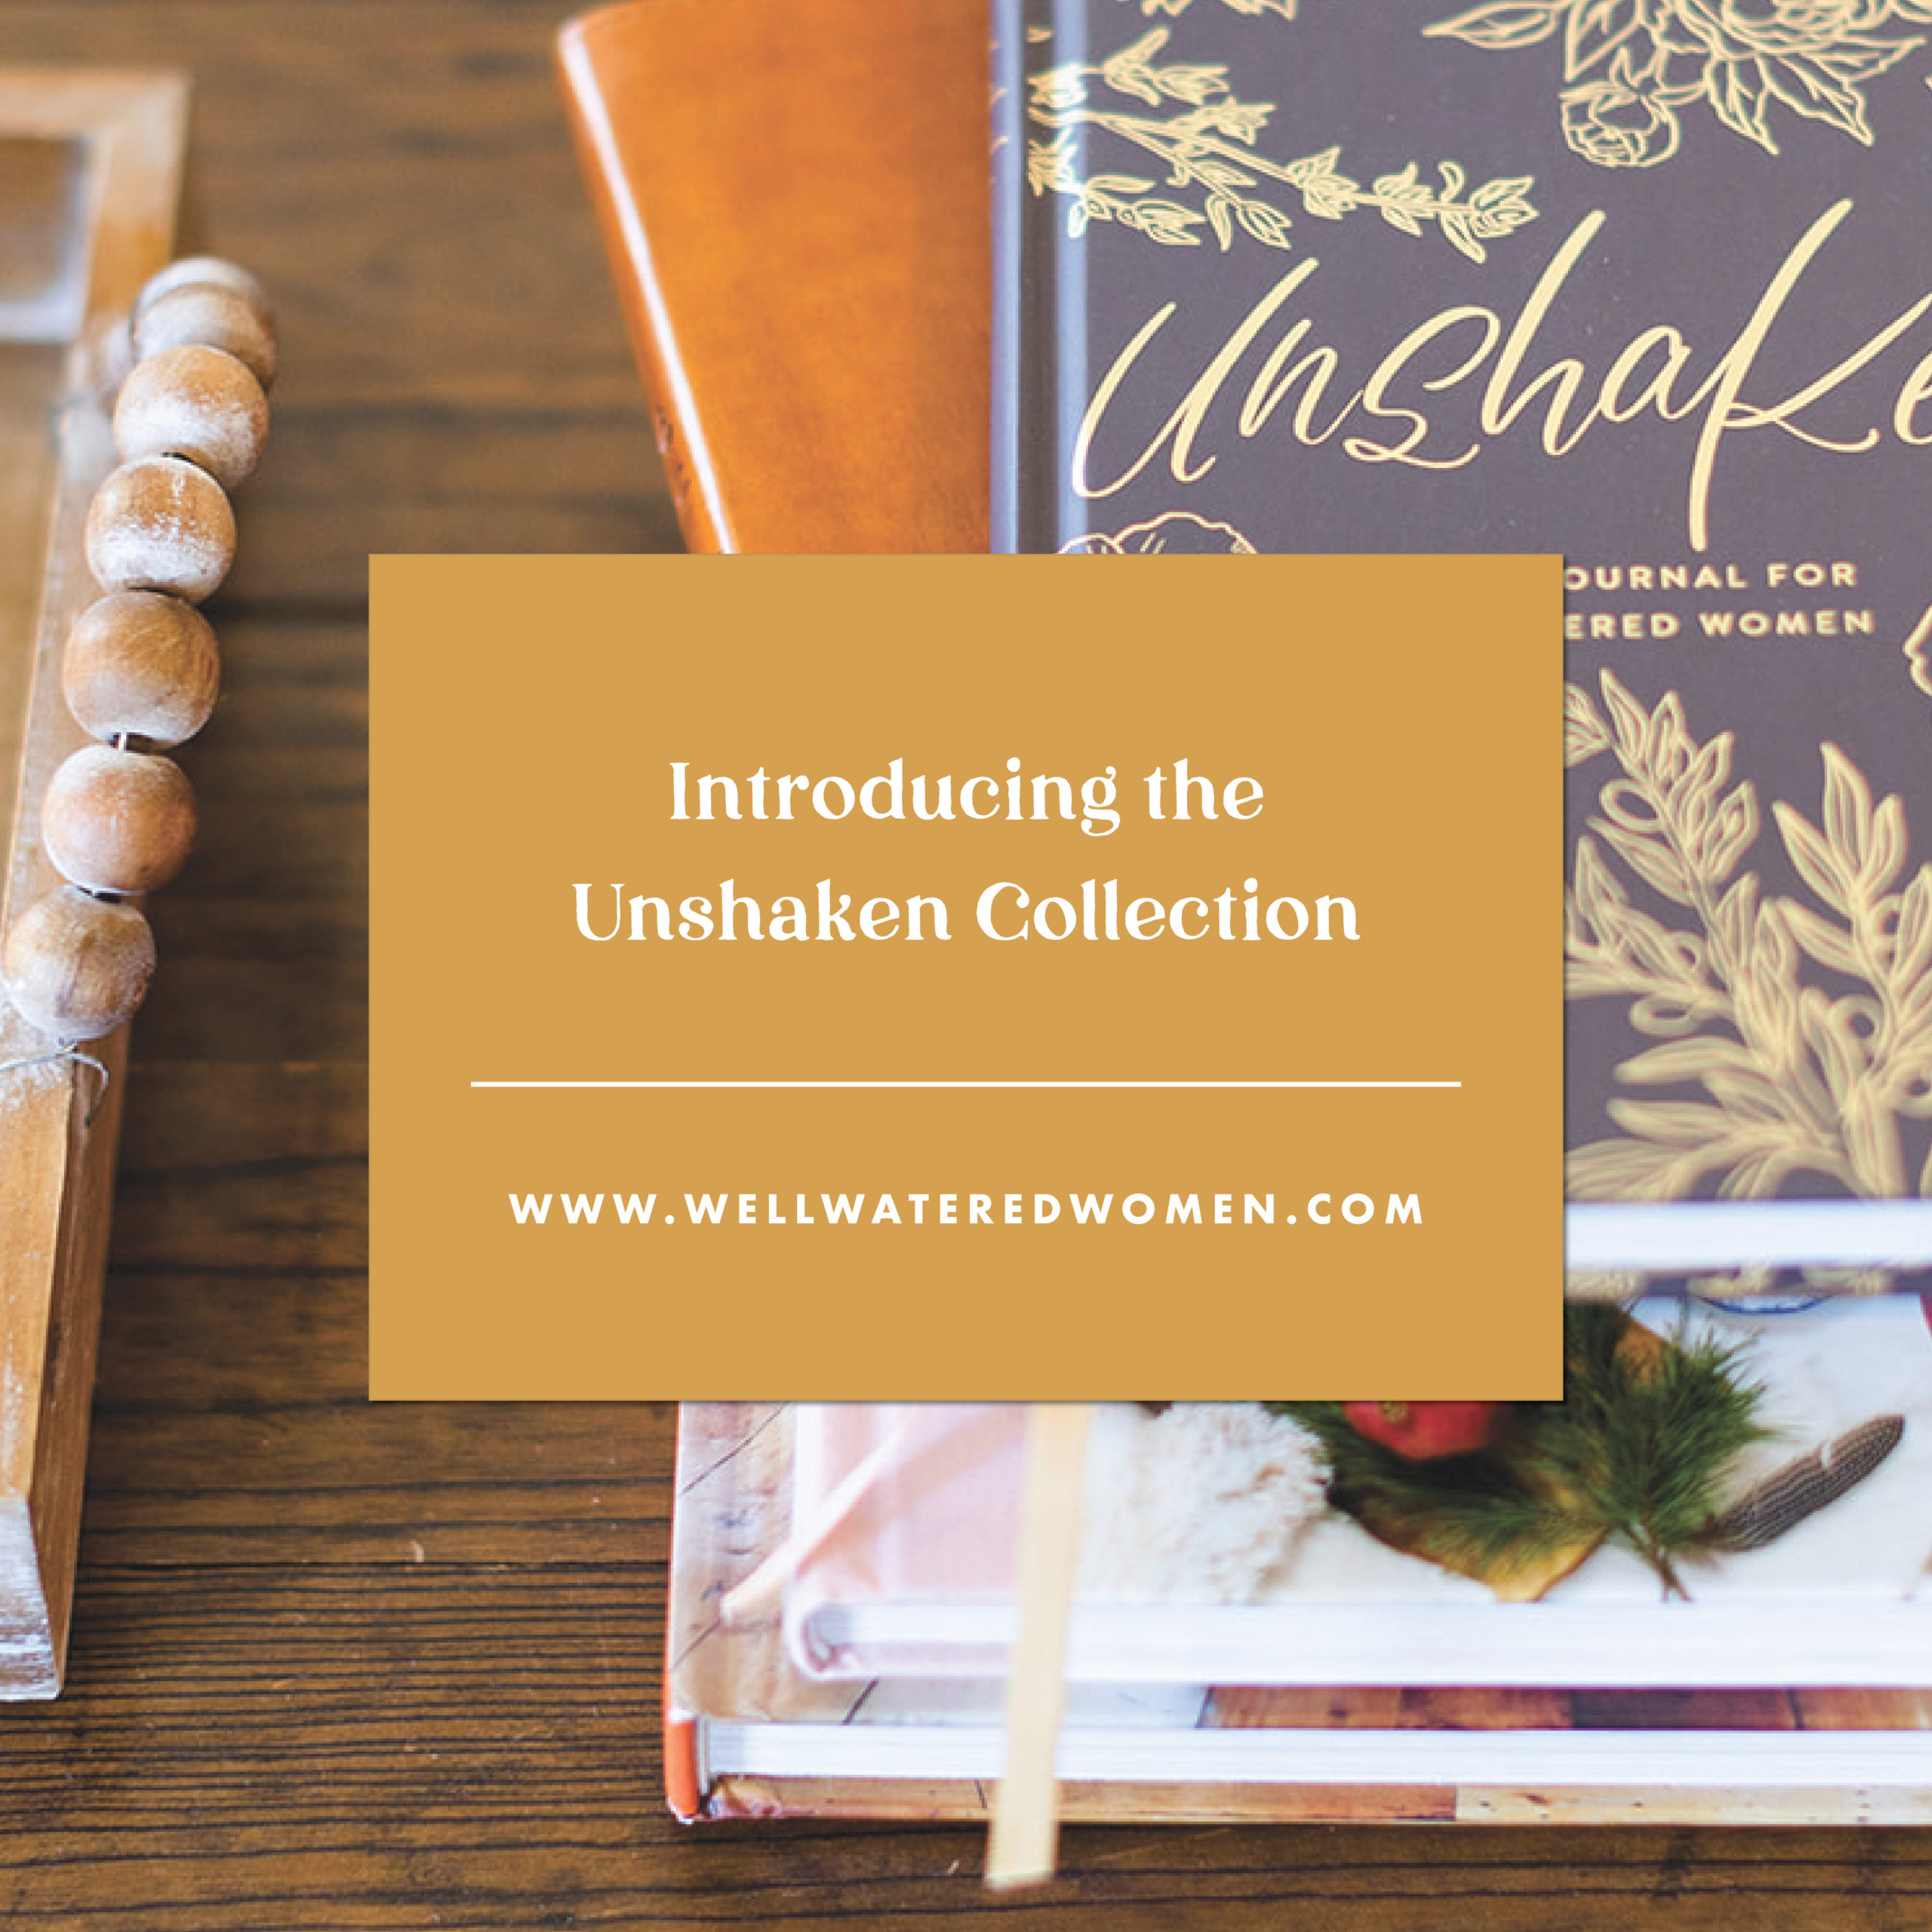 Introducing the Unshaken Collection–An Article by Well-Watered Women